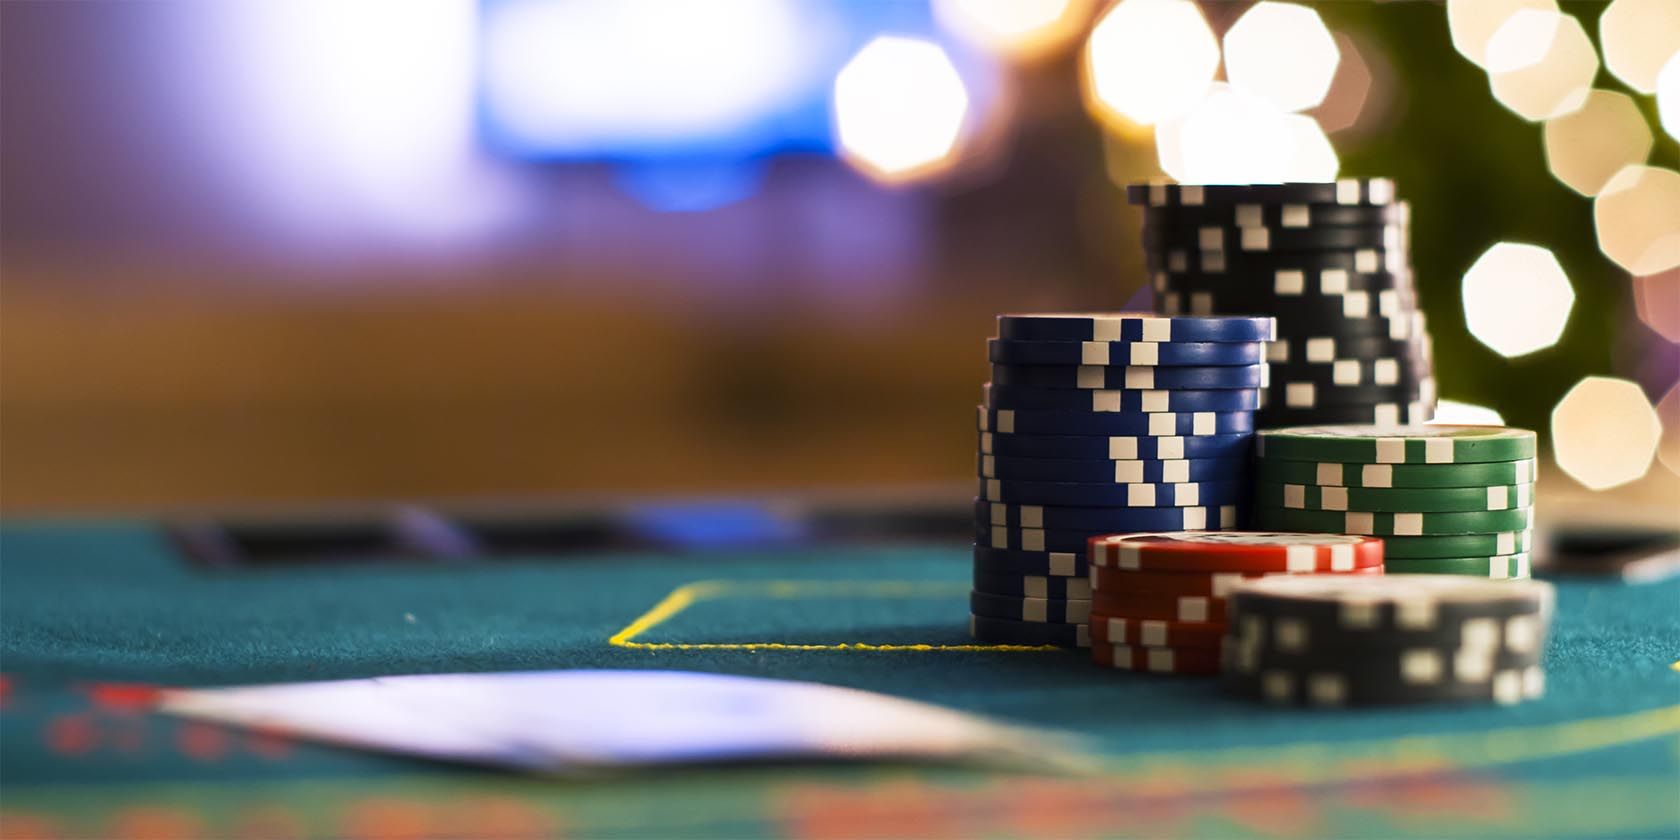 Can Poker Games Help You Train To Win For Real? | MakeUseOf